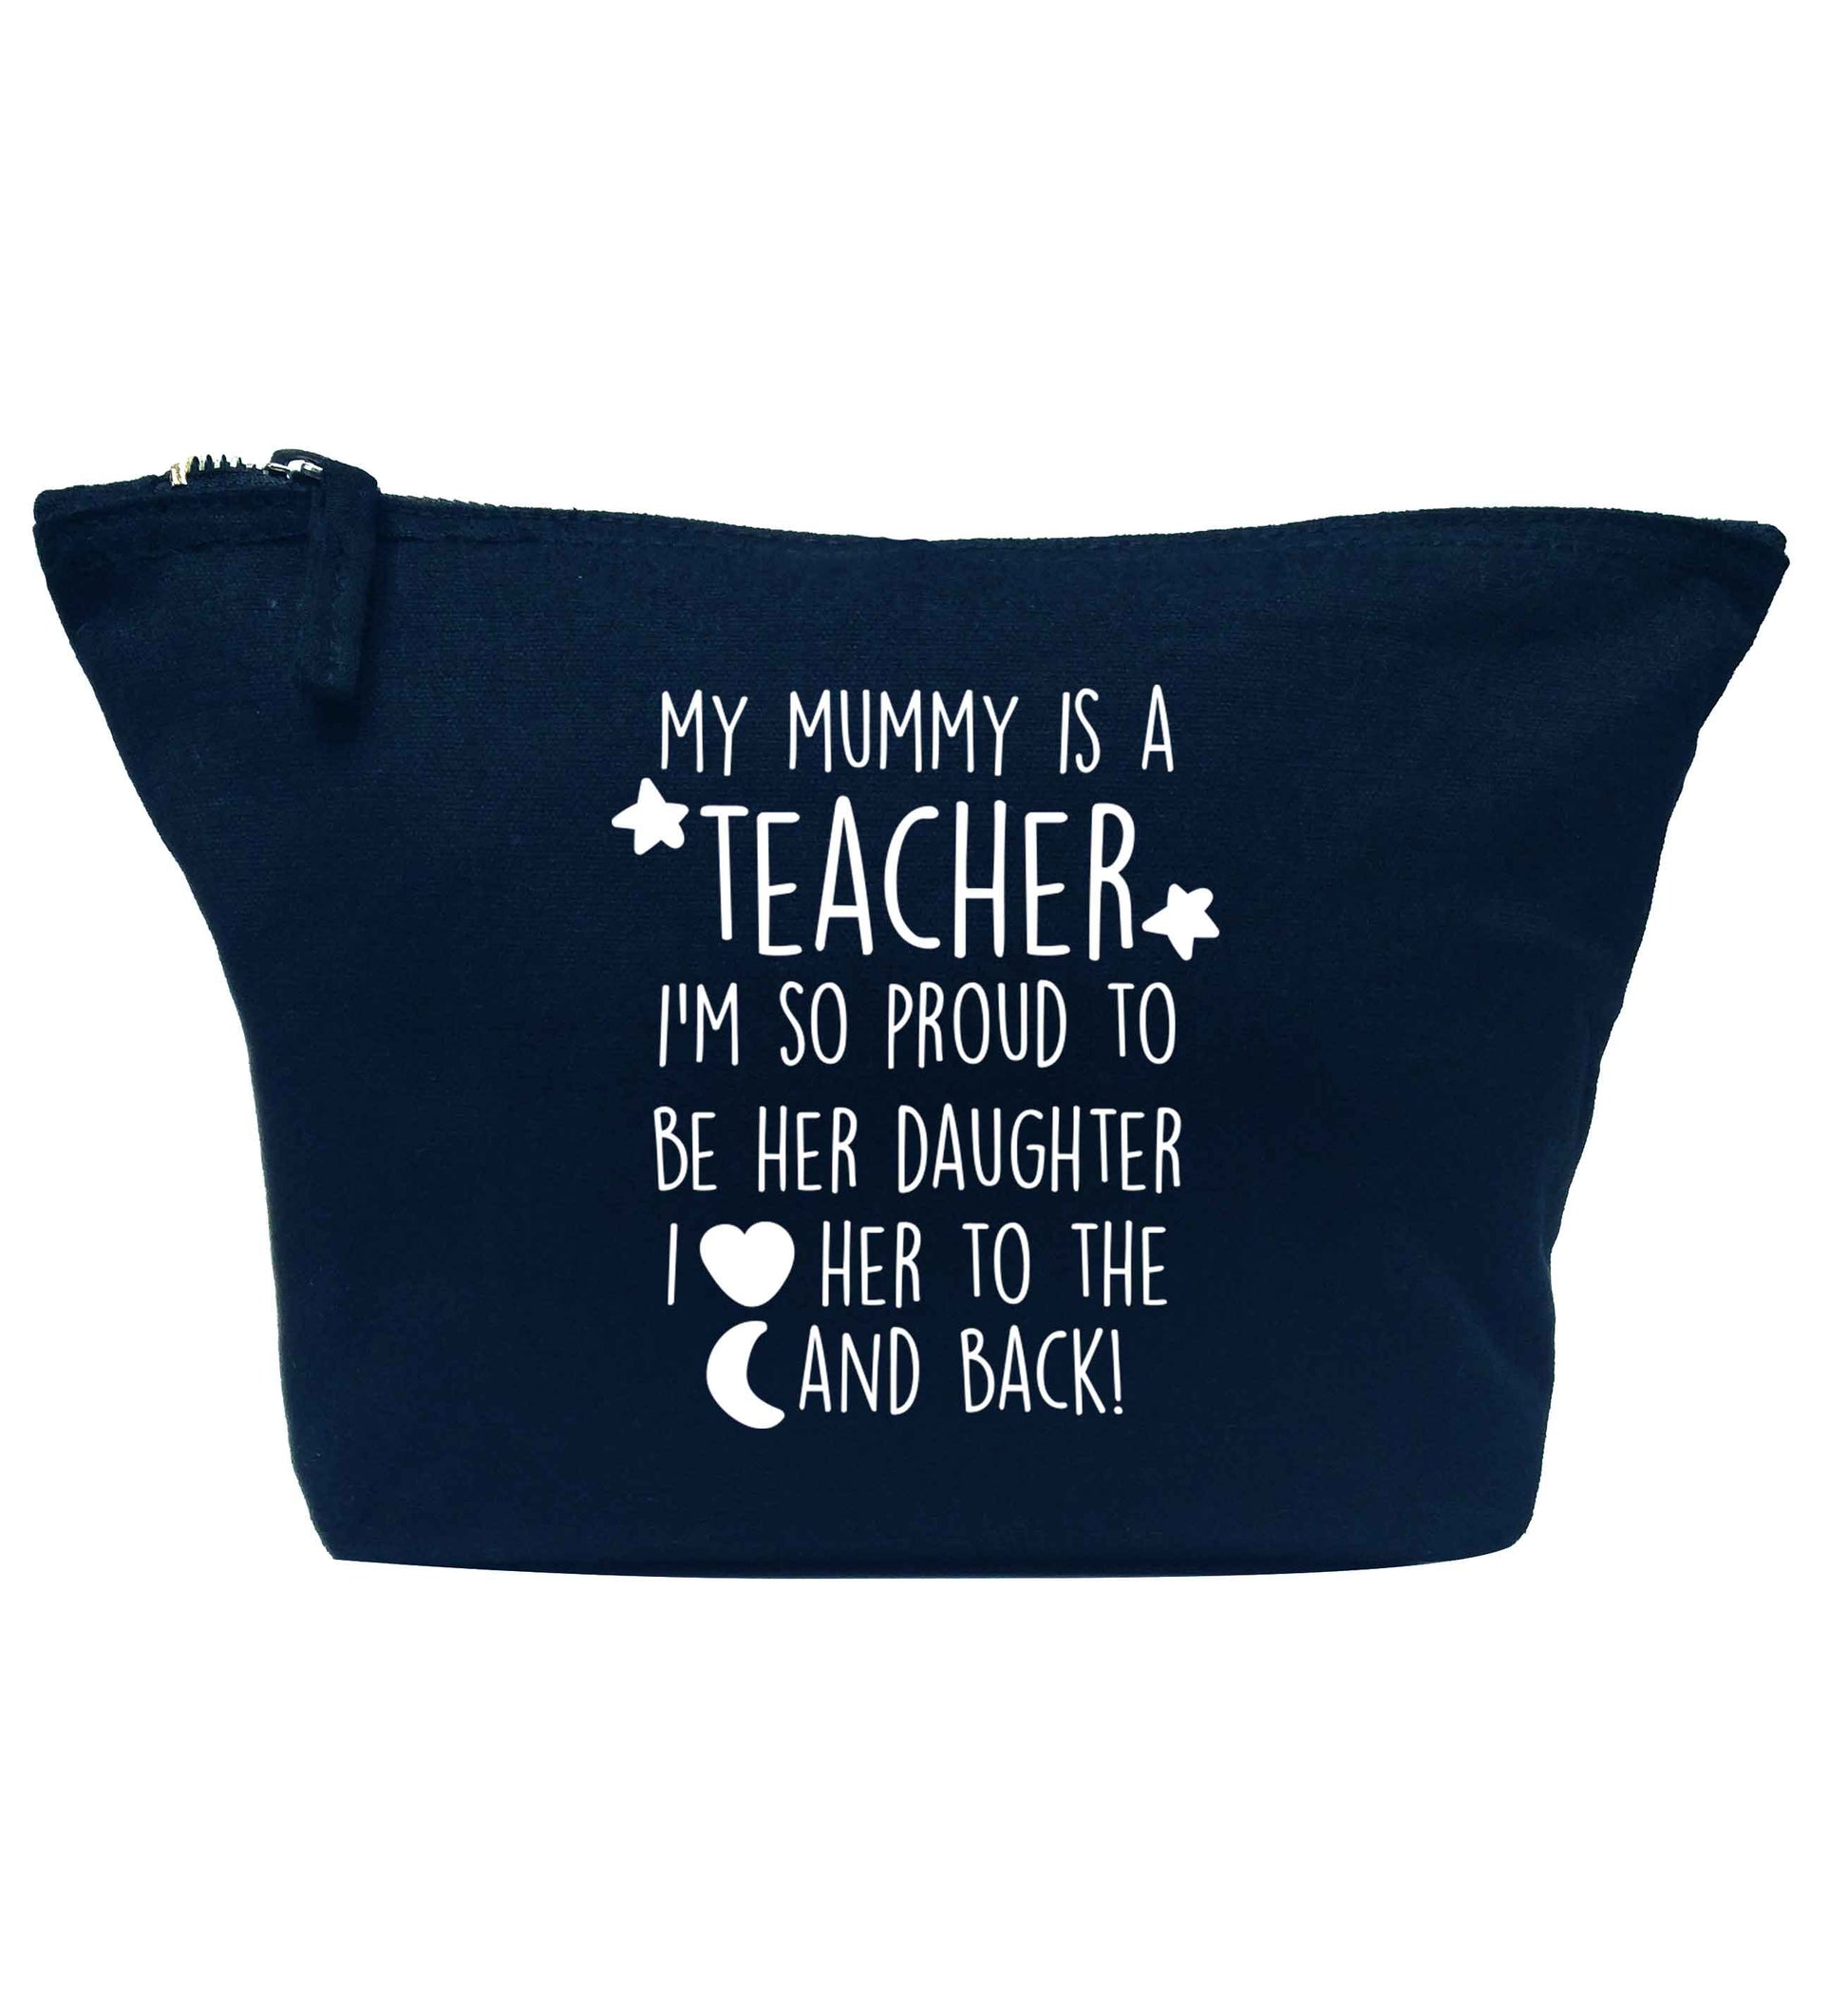 My mummy is a teacher I'm so proud to be her daughter I love her to the moon and back navy makeup bag